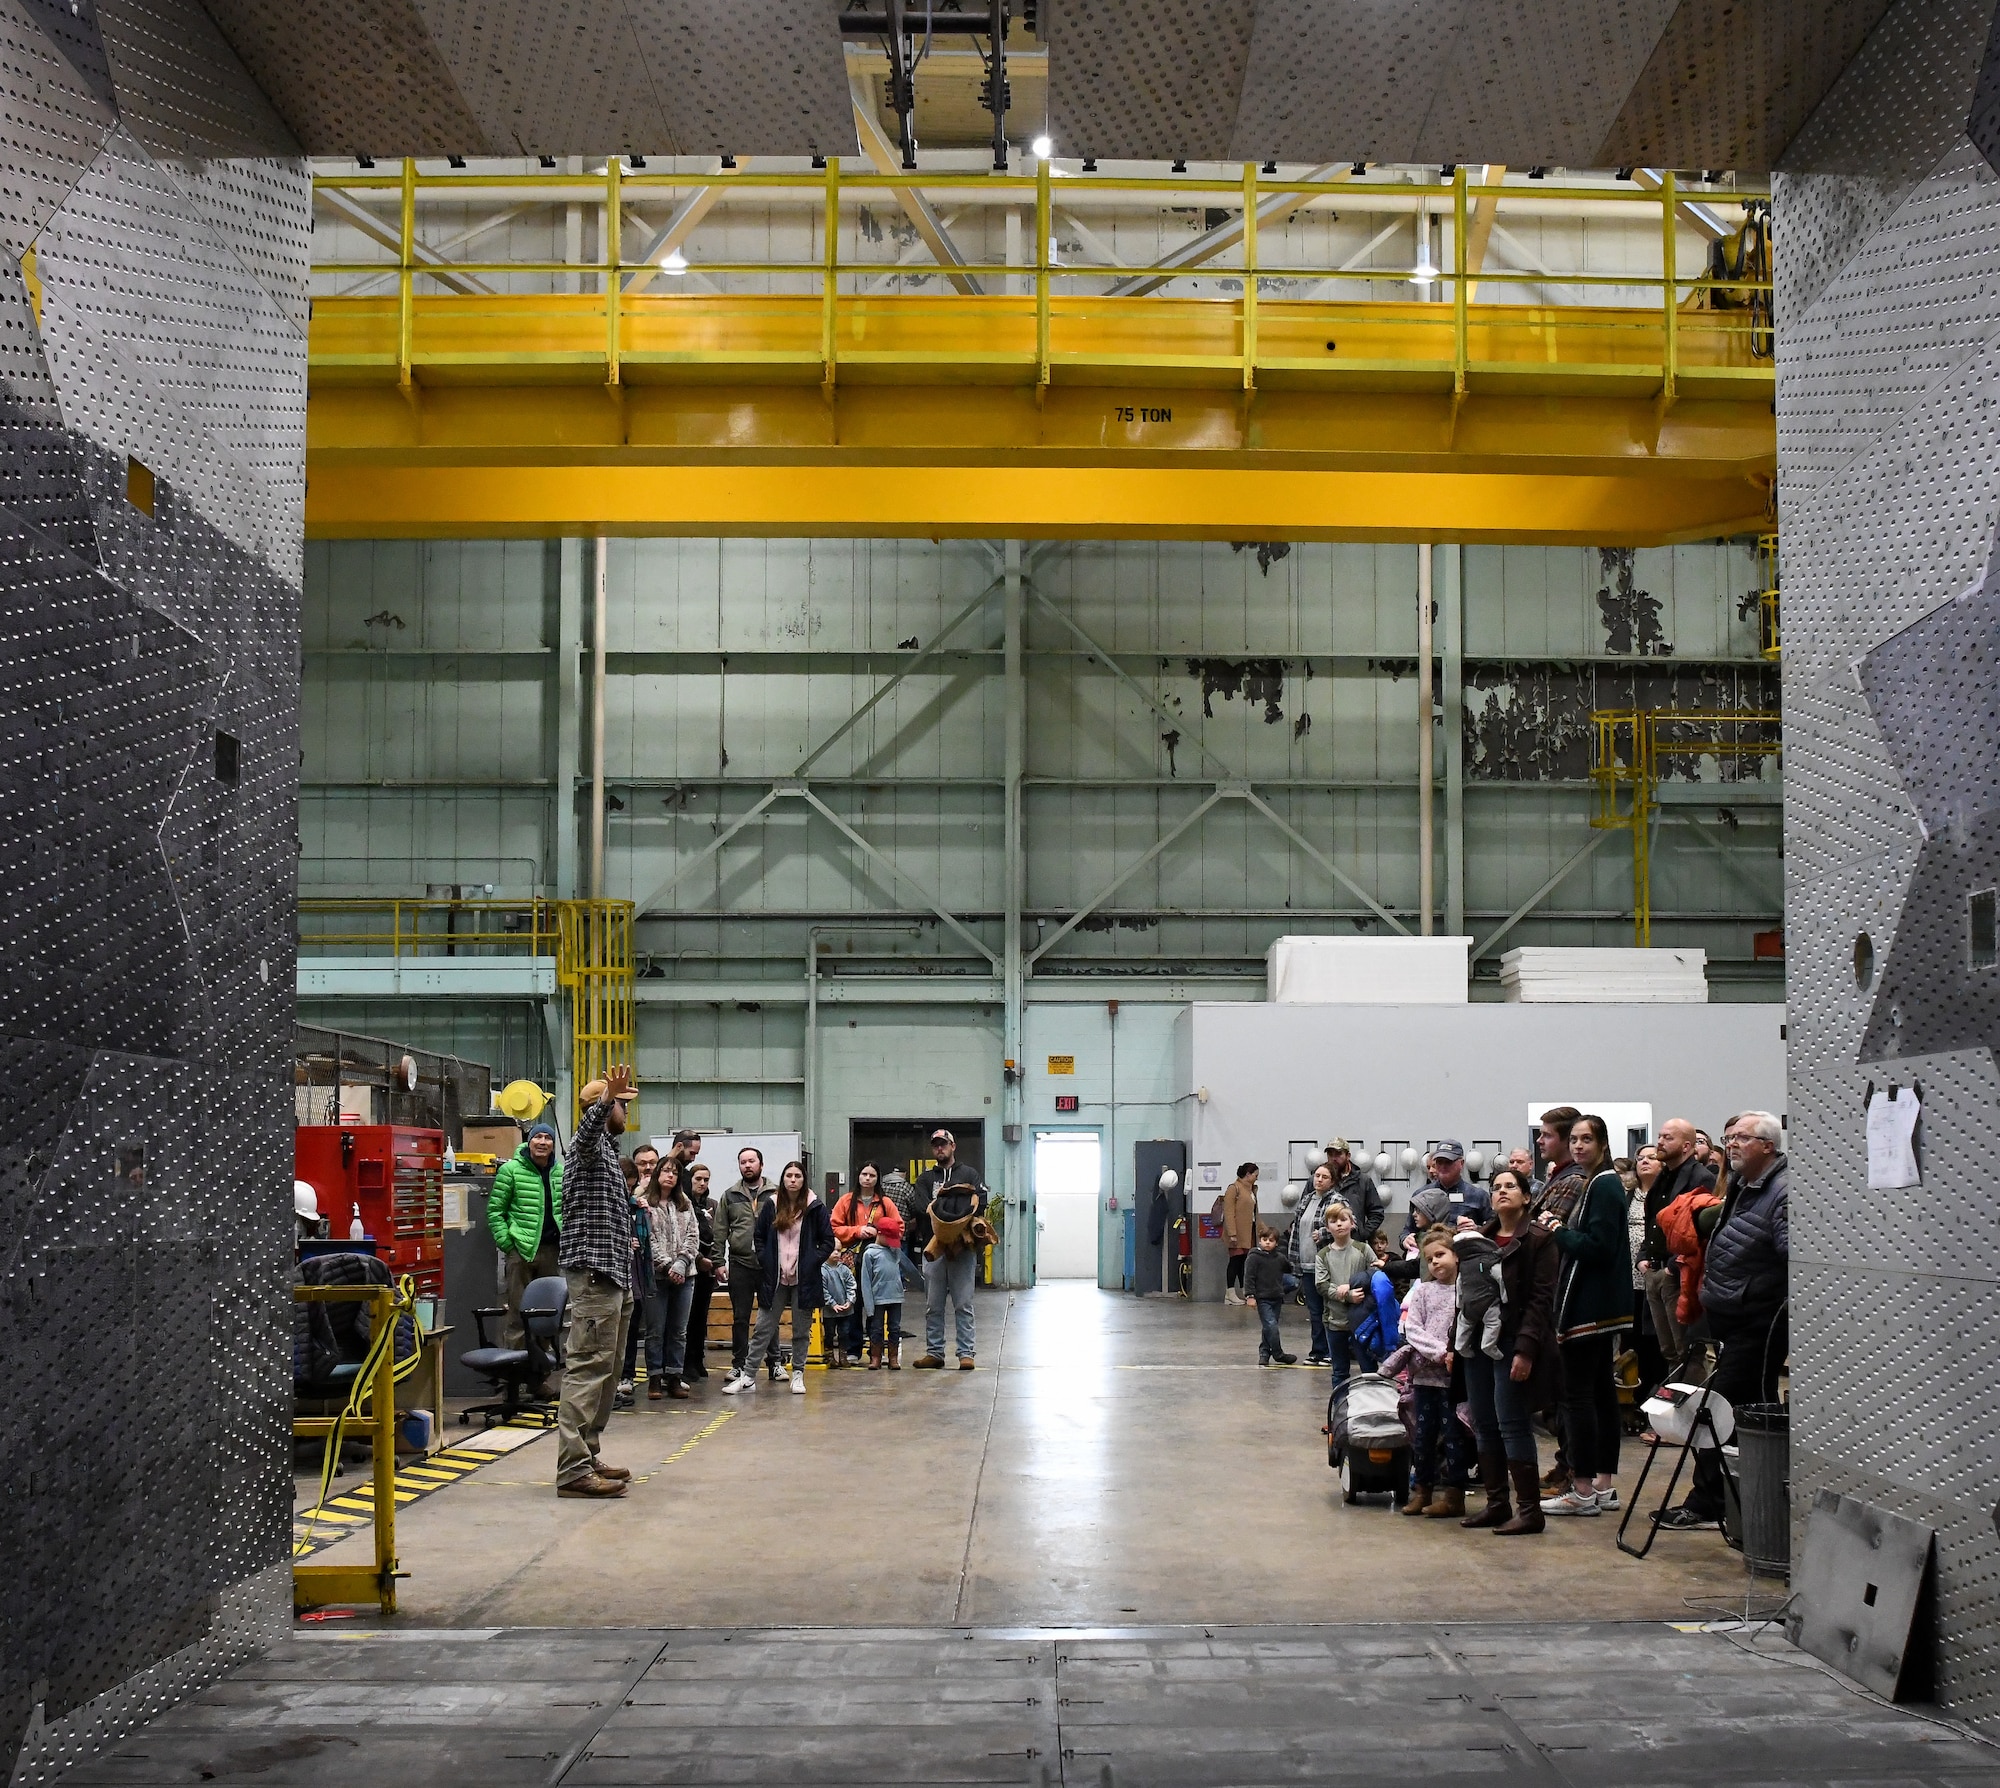 Groups of people standing inside large industrial building